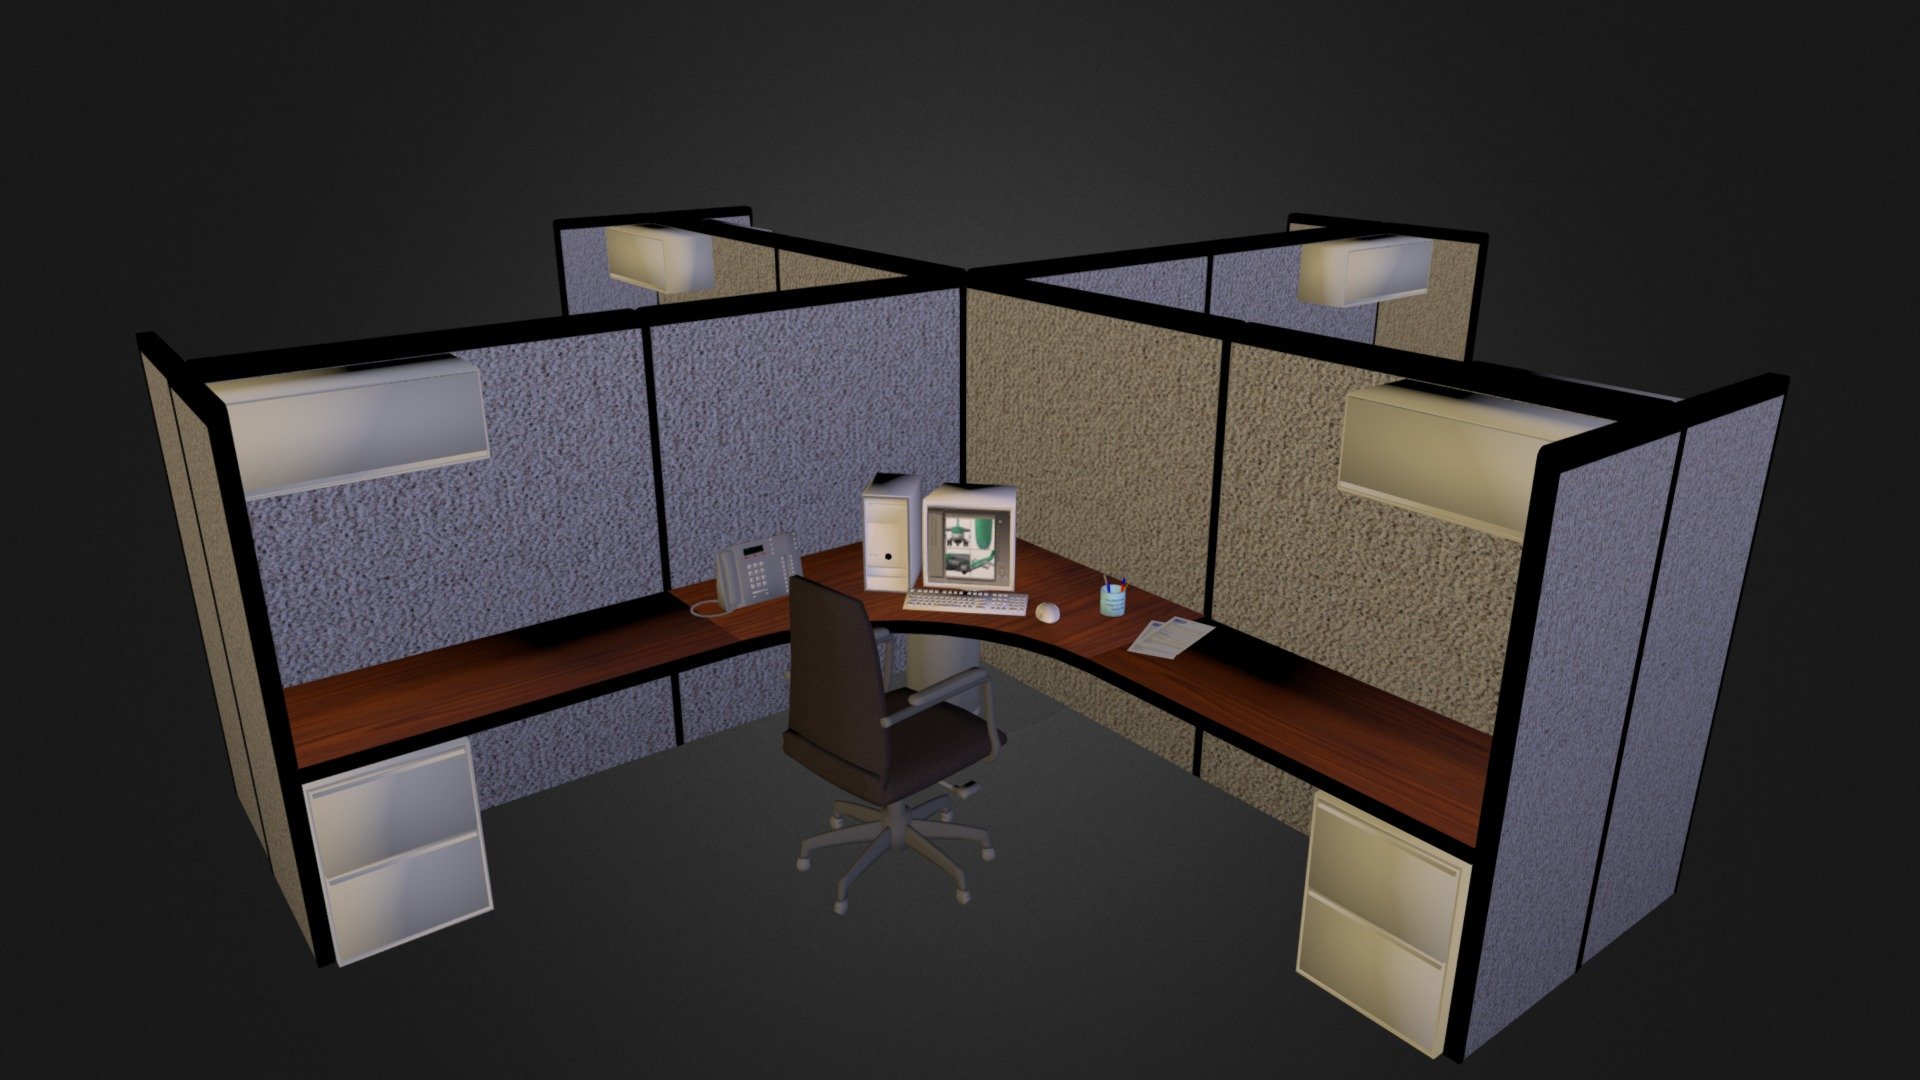 A model of a 4-cubicle office environment. Includes desks, chairs, computers, cabinets, and paperwork on the desks 3d model